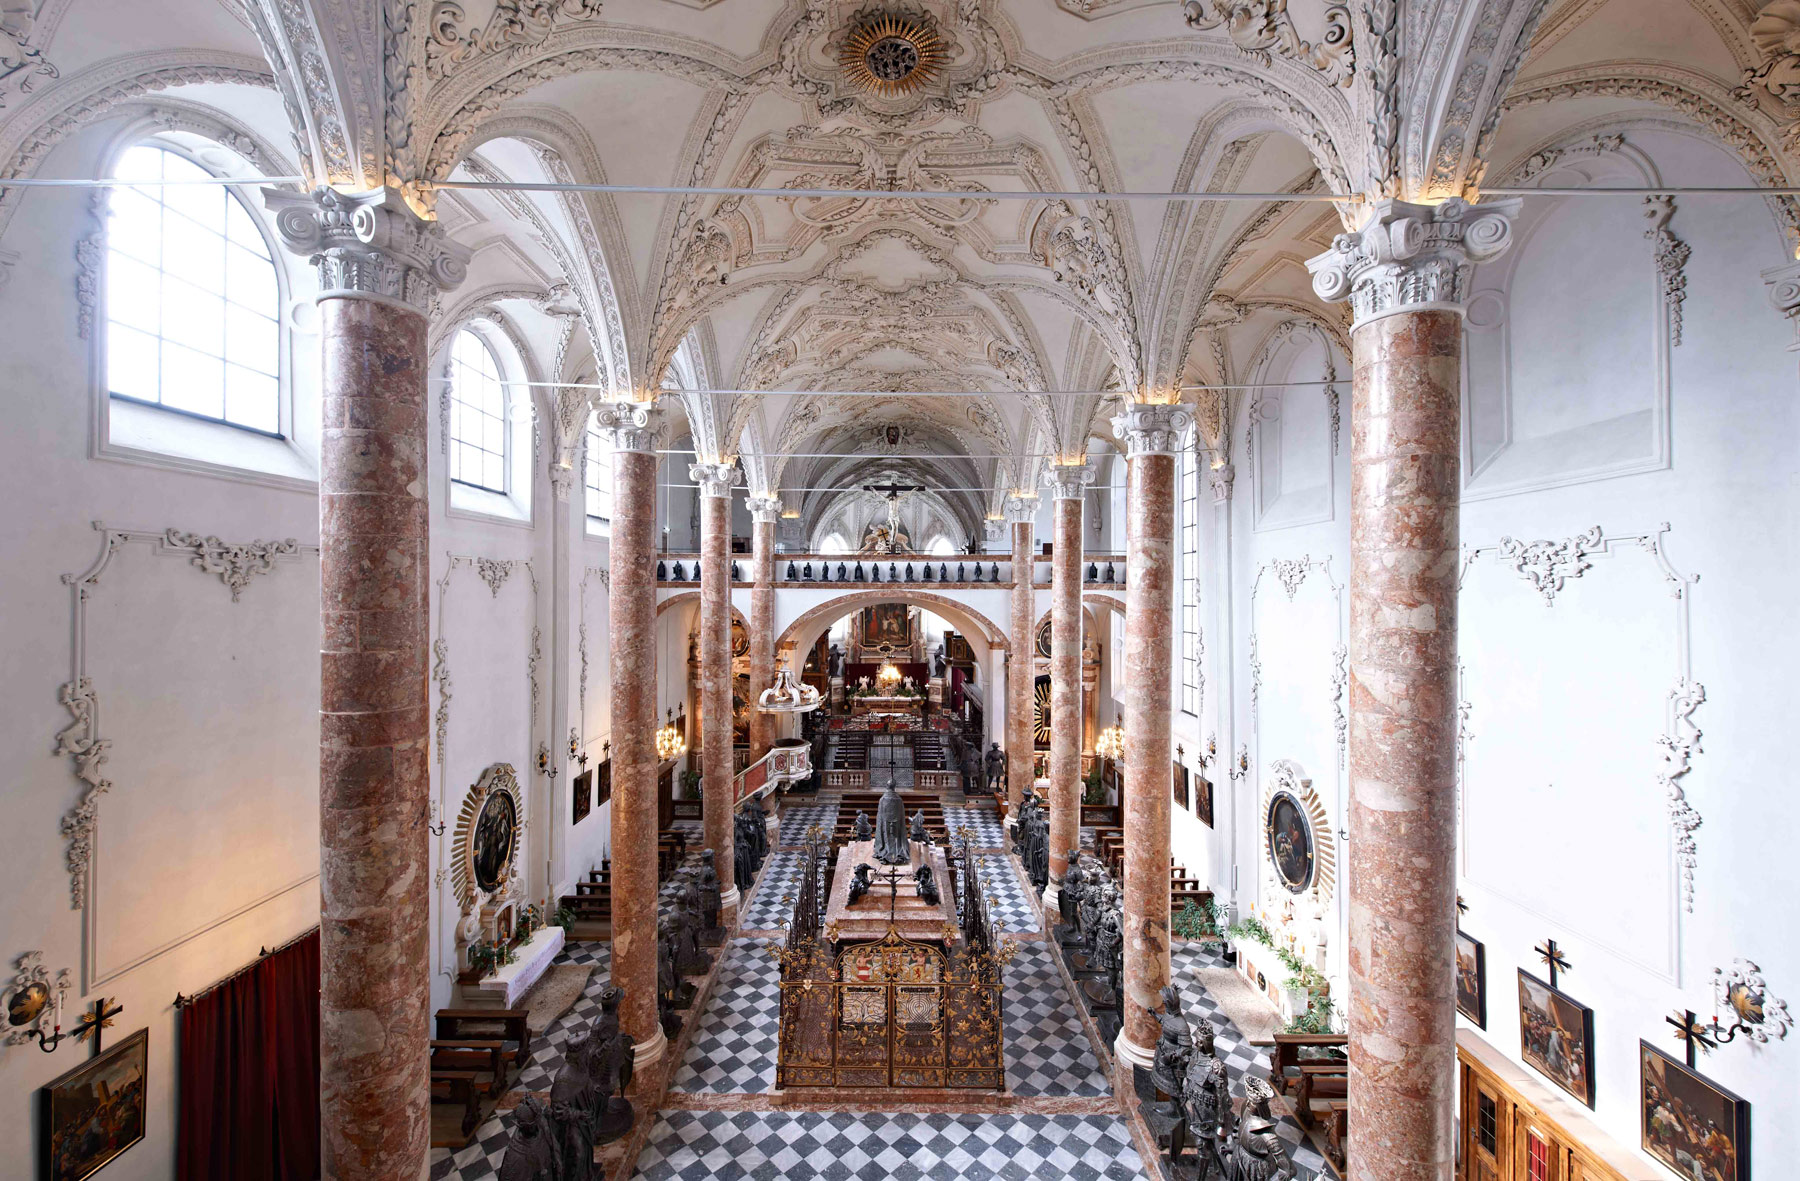 The Hofkirche with the tomb of Maximilian I in the center. Photo by Alexander Haiden